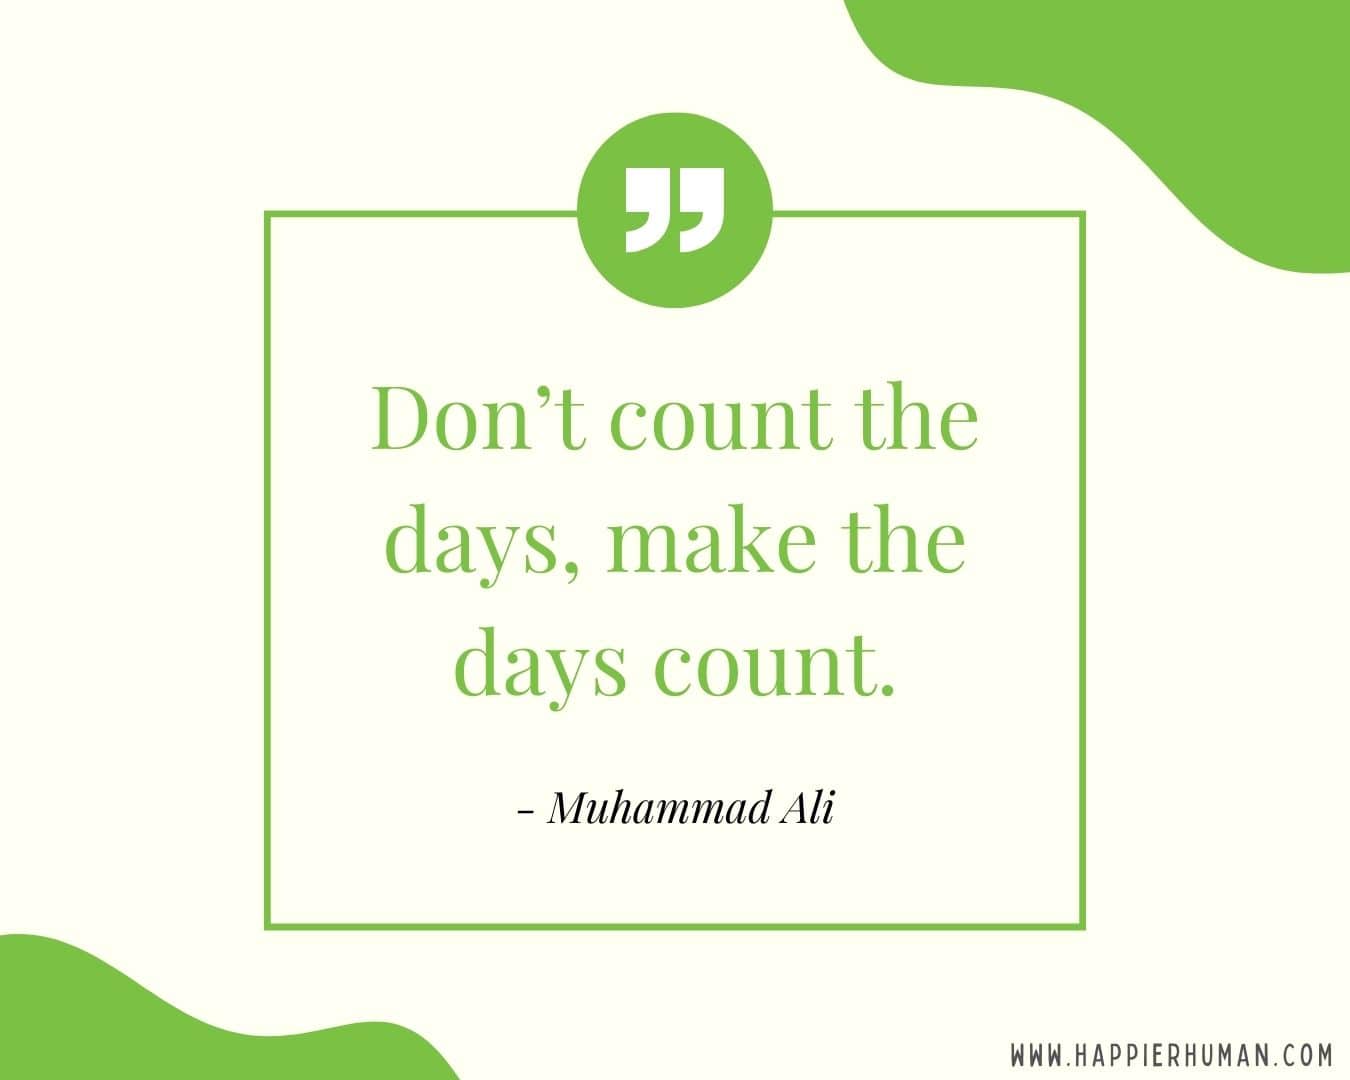 Great Day Quotes - “Don’t count the days, make the days count.” – Muhammad Ali